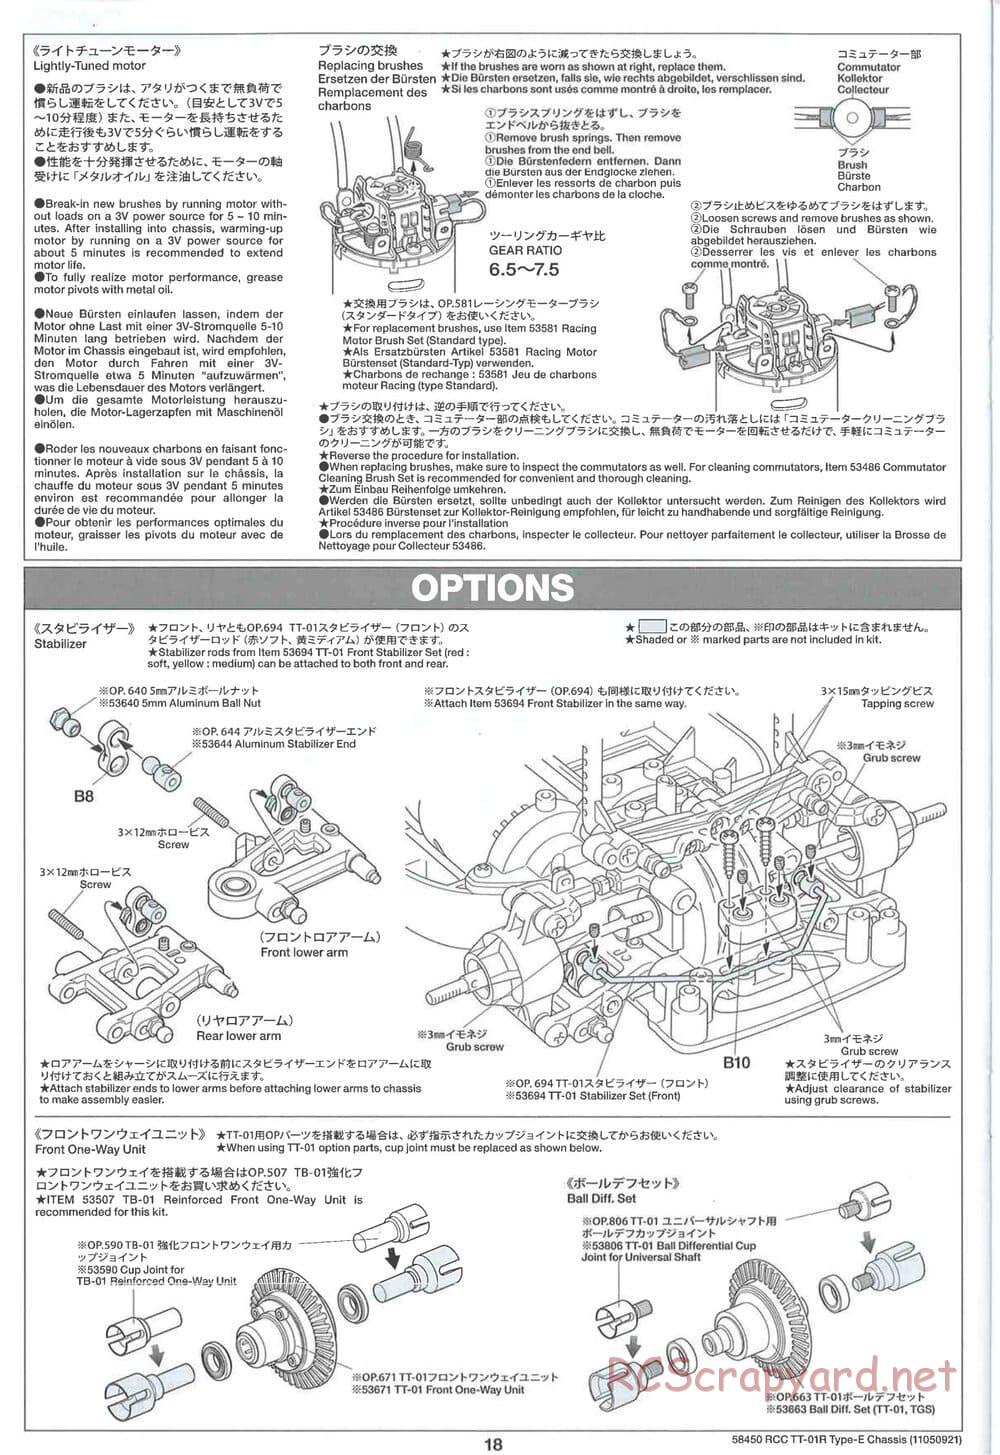 Tamiya - TT-01R Type-E Chassis - Manual - Page 18